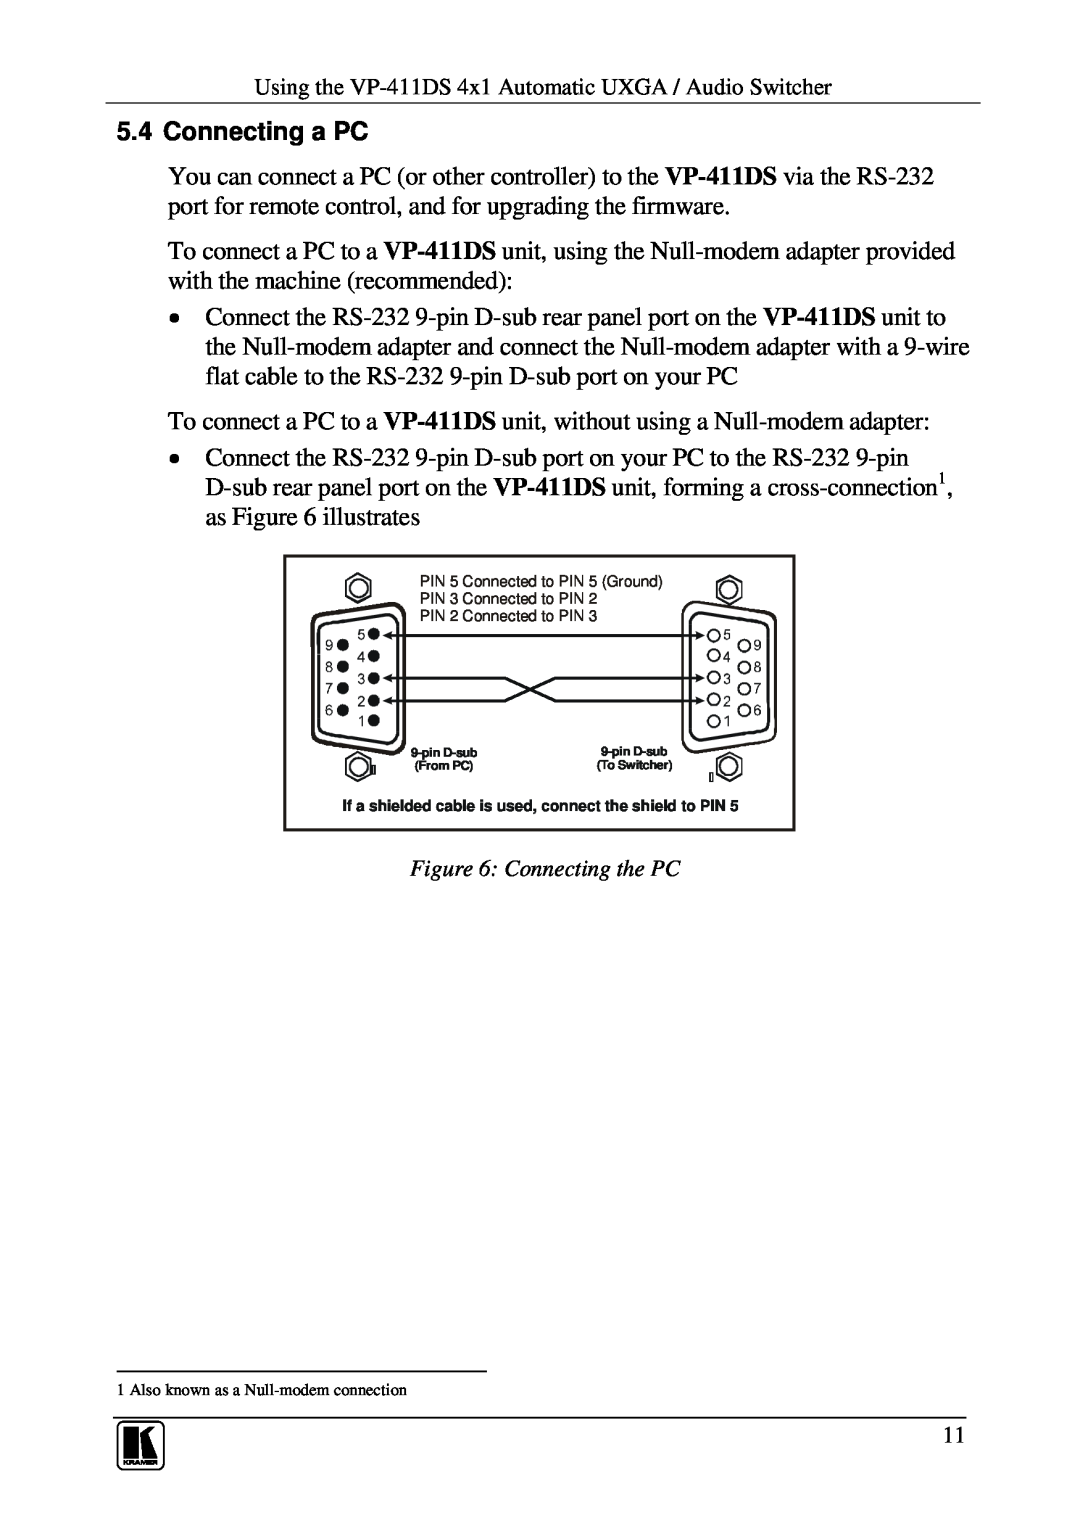 Kramer Electronics VP-411DS user manual Connecting a PC, Connecting the PC 